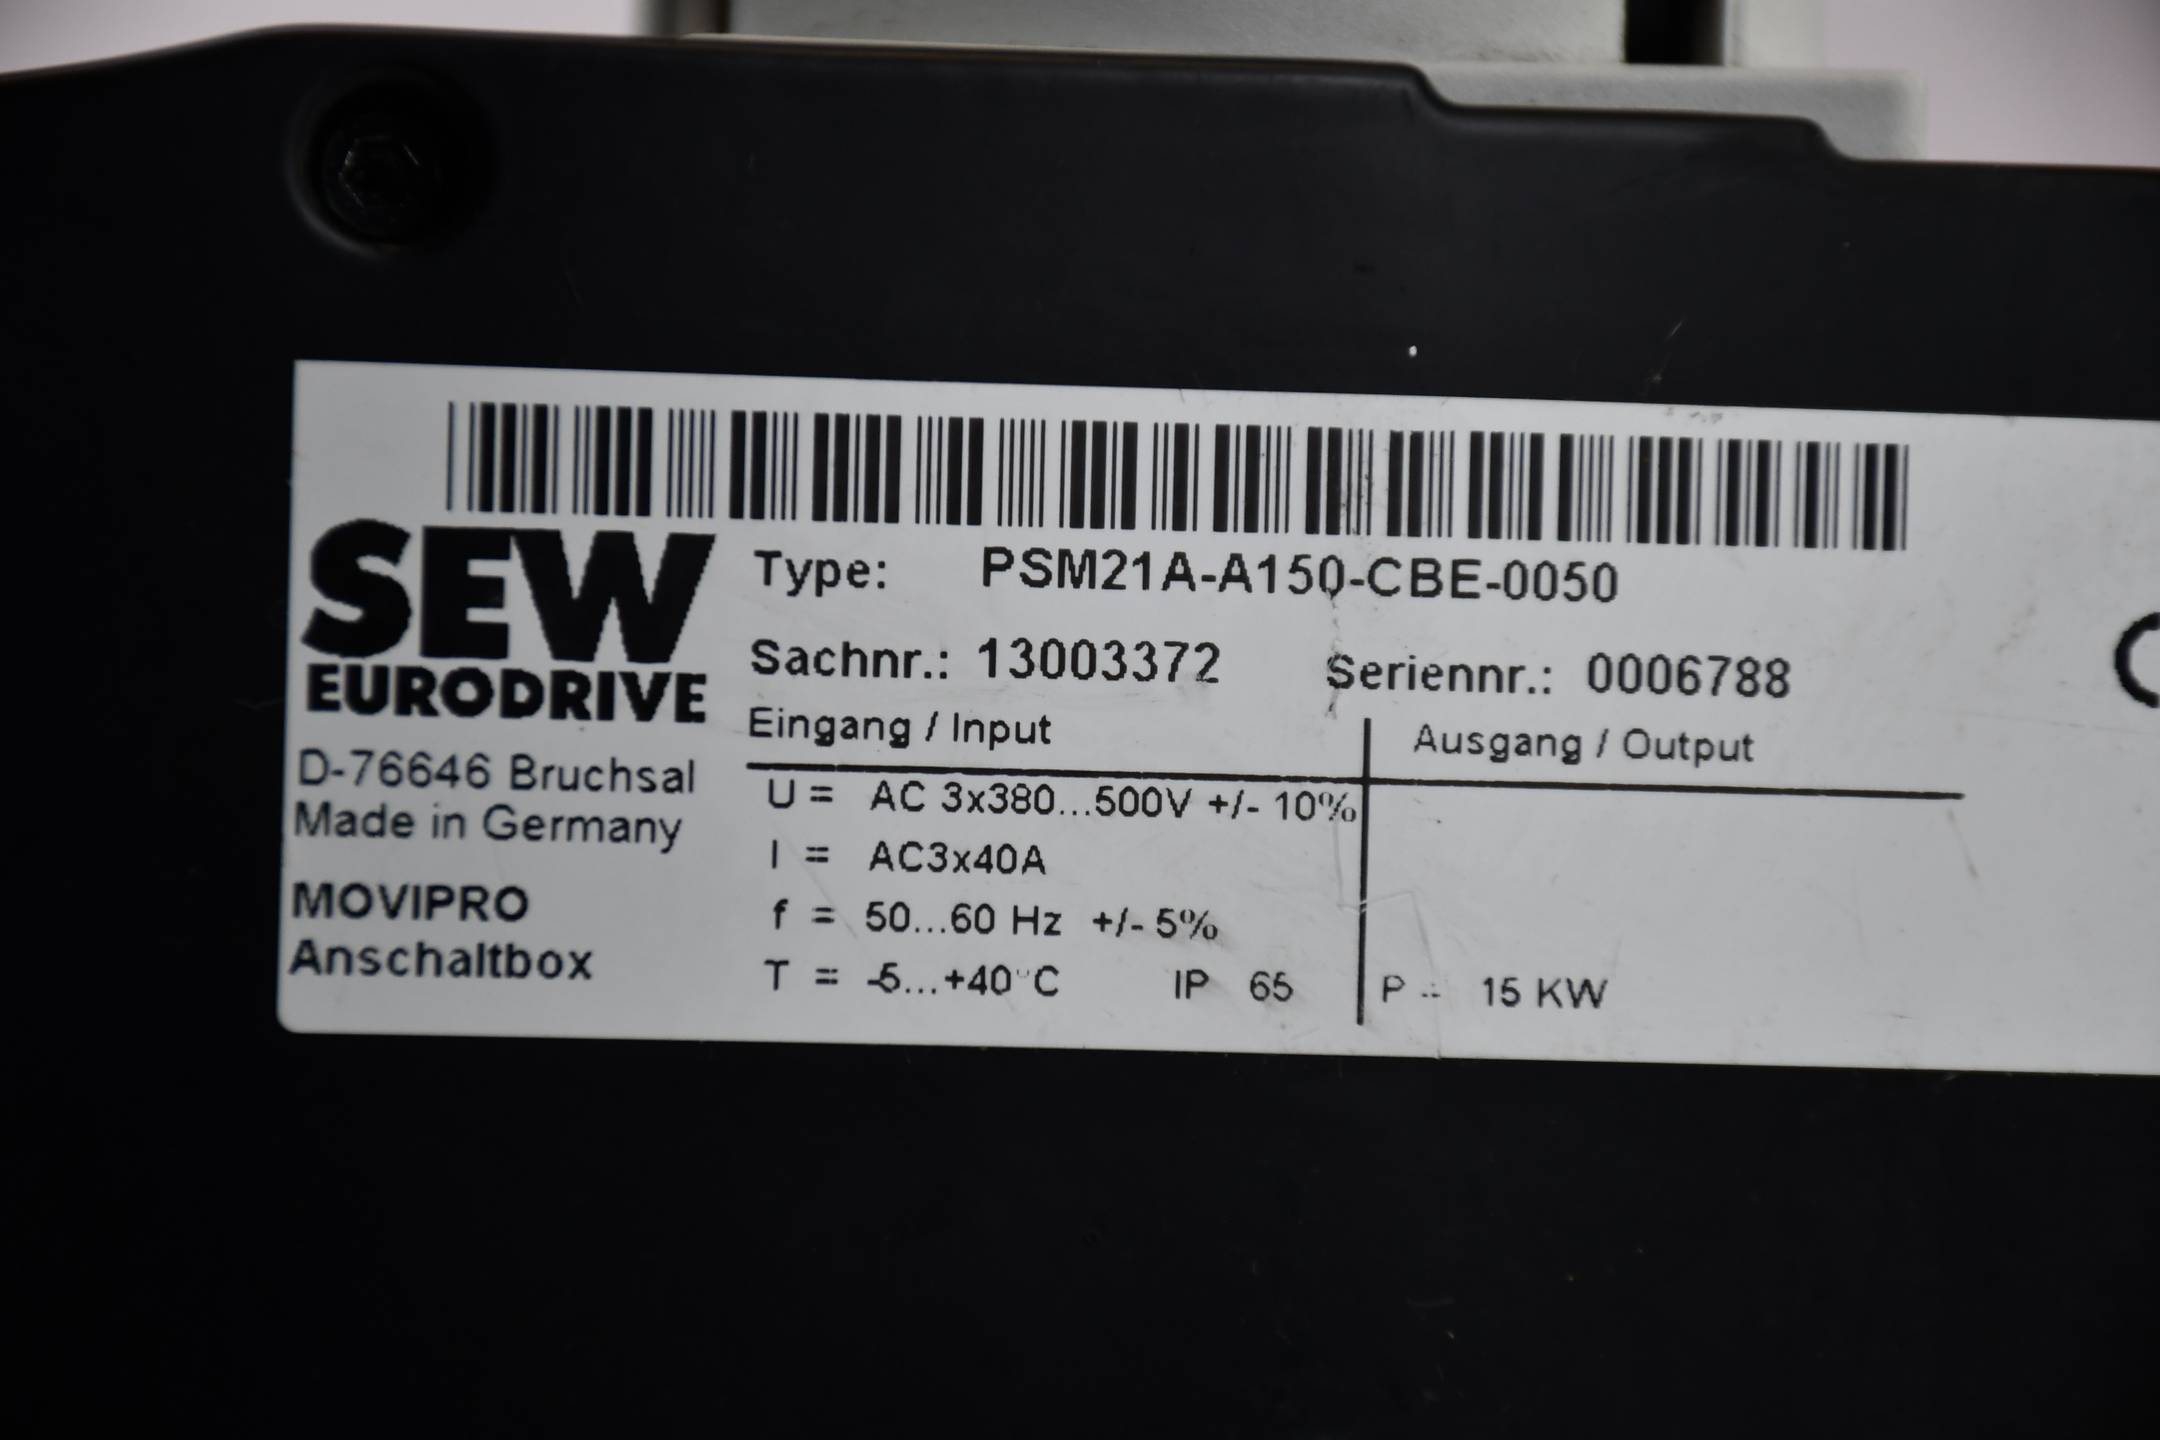 SEW Eurodrive Movipro® ADC PHC21A inkl. Schaltmodul PZM PSM21A-A150-CBE-0050